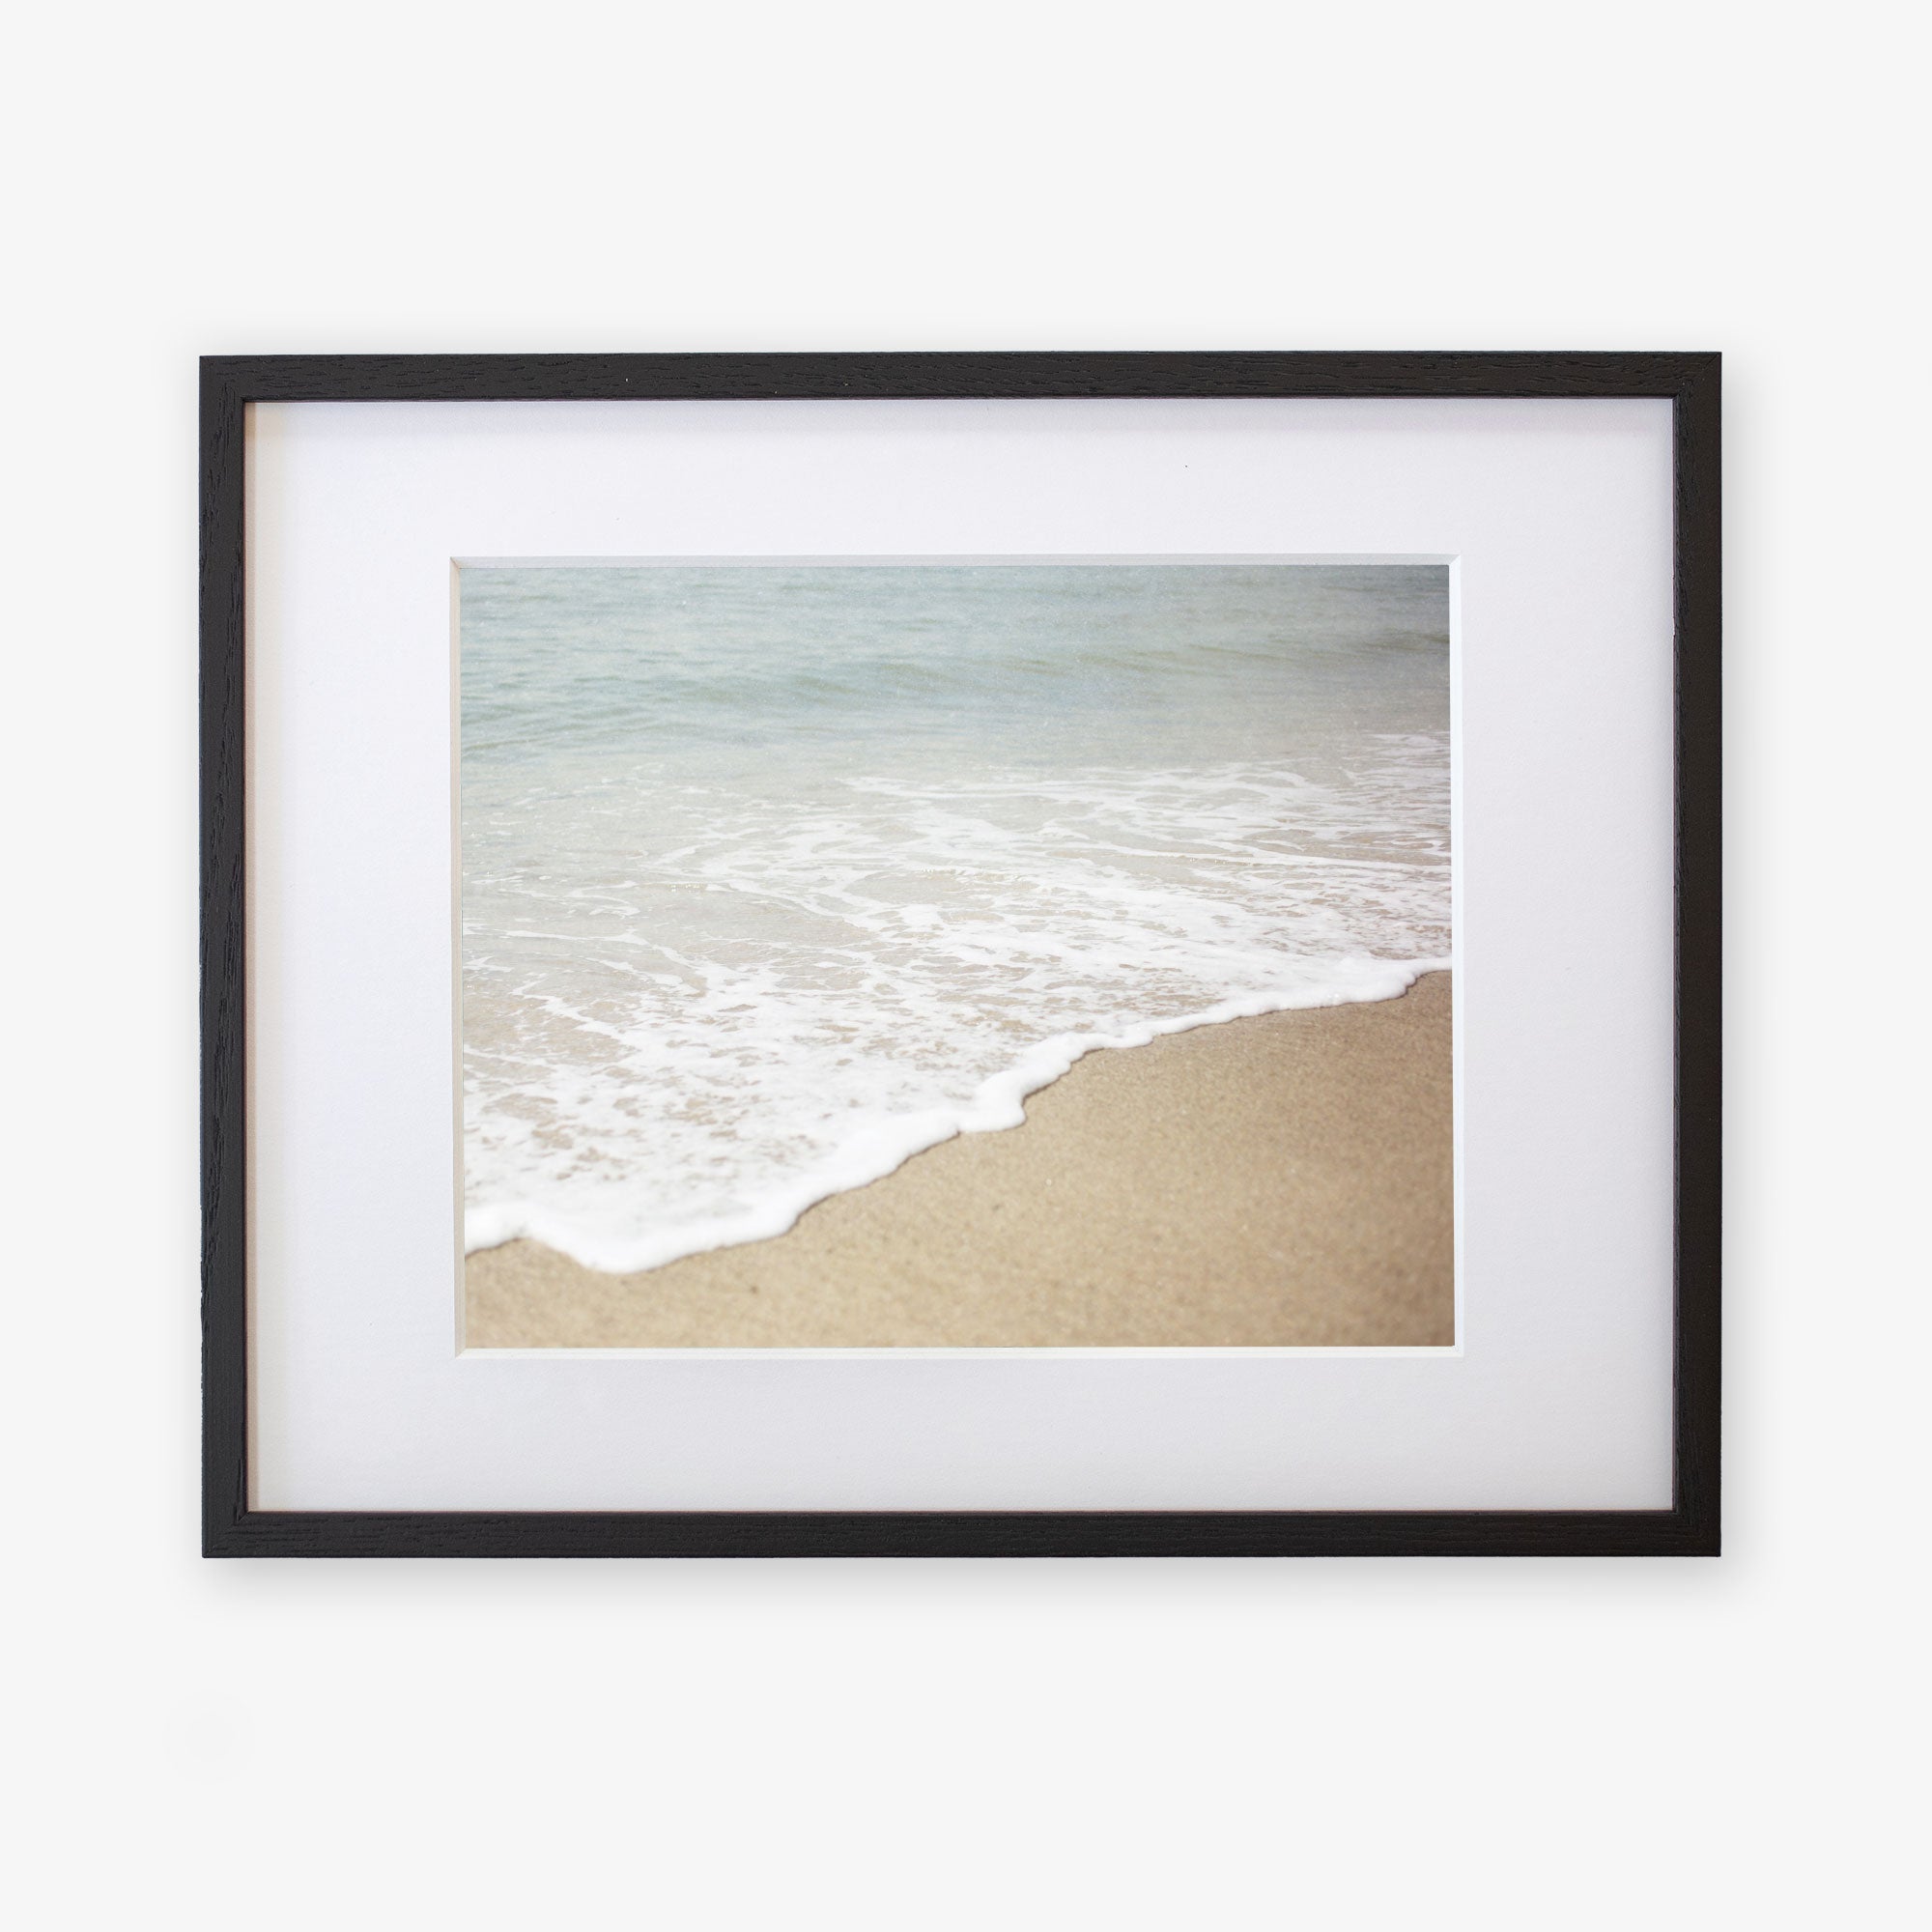 A framed Beach Waves Print, &#39;Chasing Surf&#39; of a California beach scene, showing gentle waves lapping onto a sandy shore, mounted on archival photographic paper within a black frame by Offley Green.